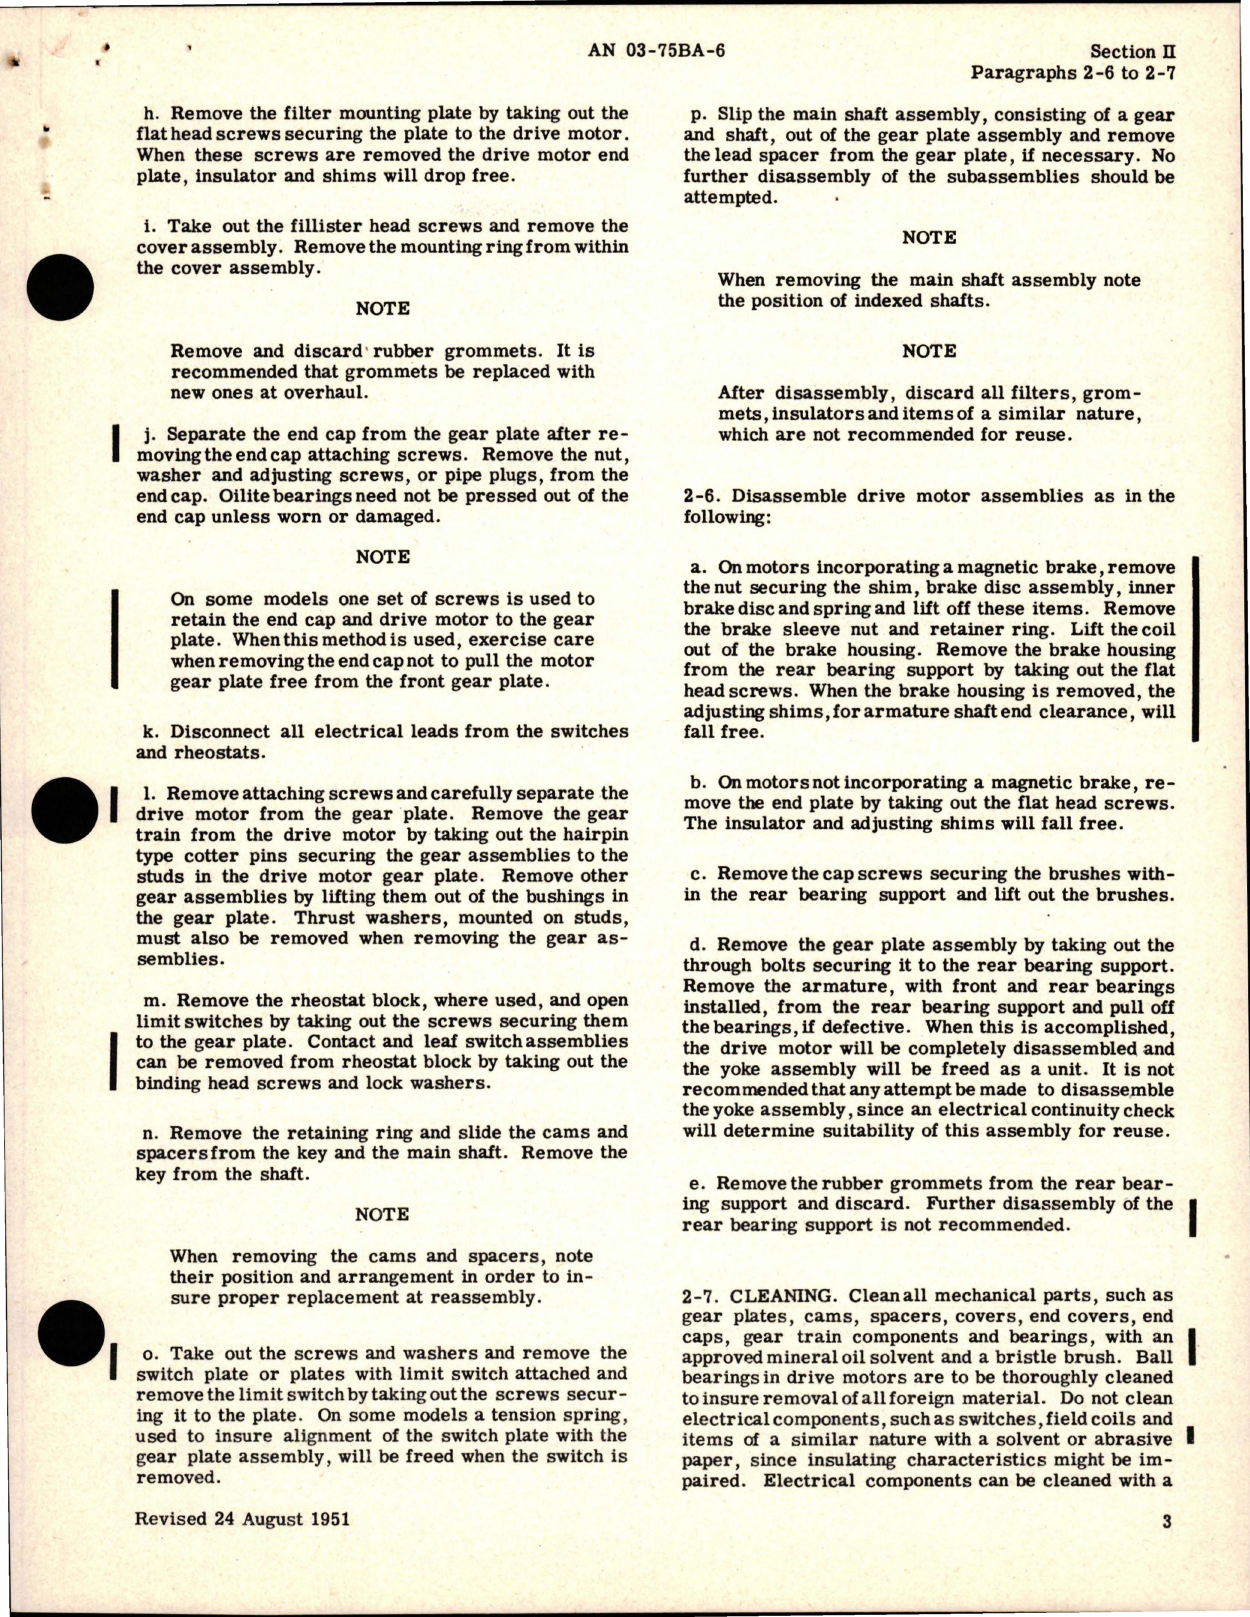 Sample page 7 from AirCorps Library document: Overhaul Instructions for Control Motors, Part AYLC Series 